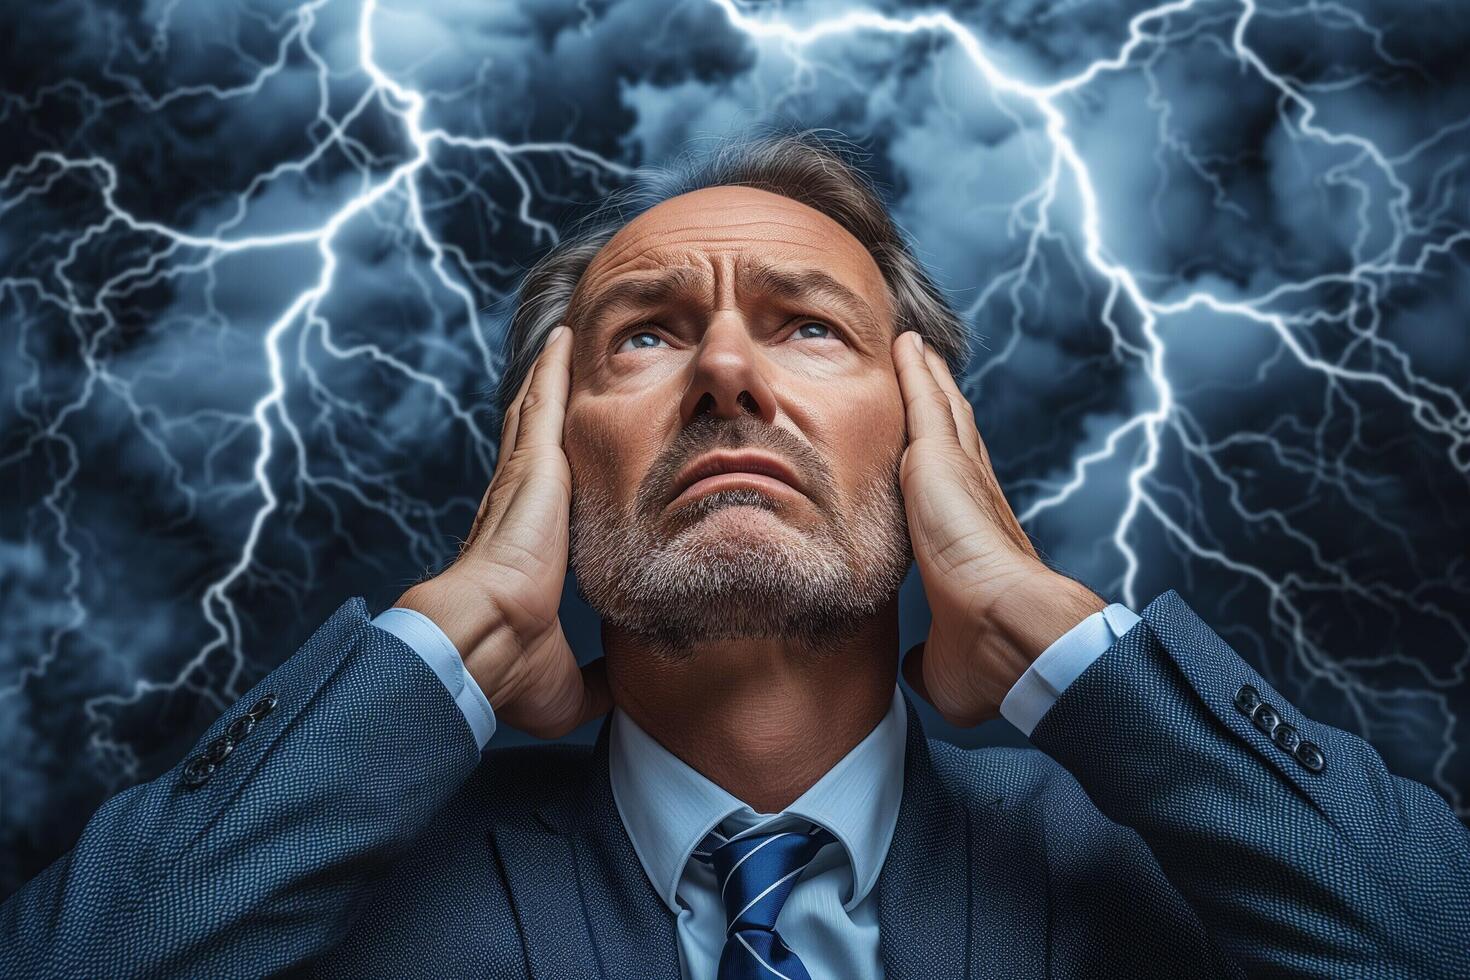 AI generated a man in a suit and tie is holding his head in his hands while looking at a storm photo